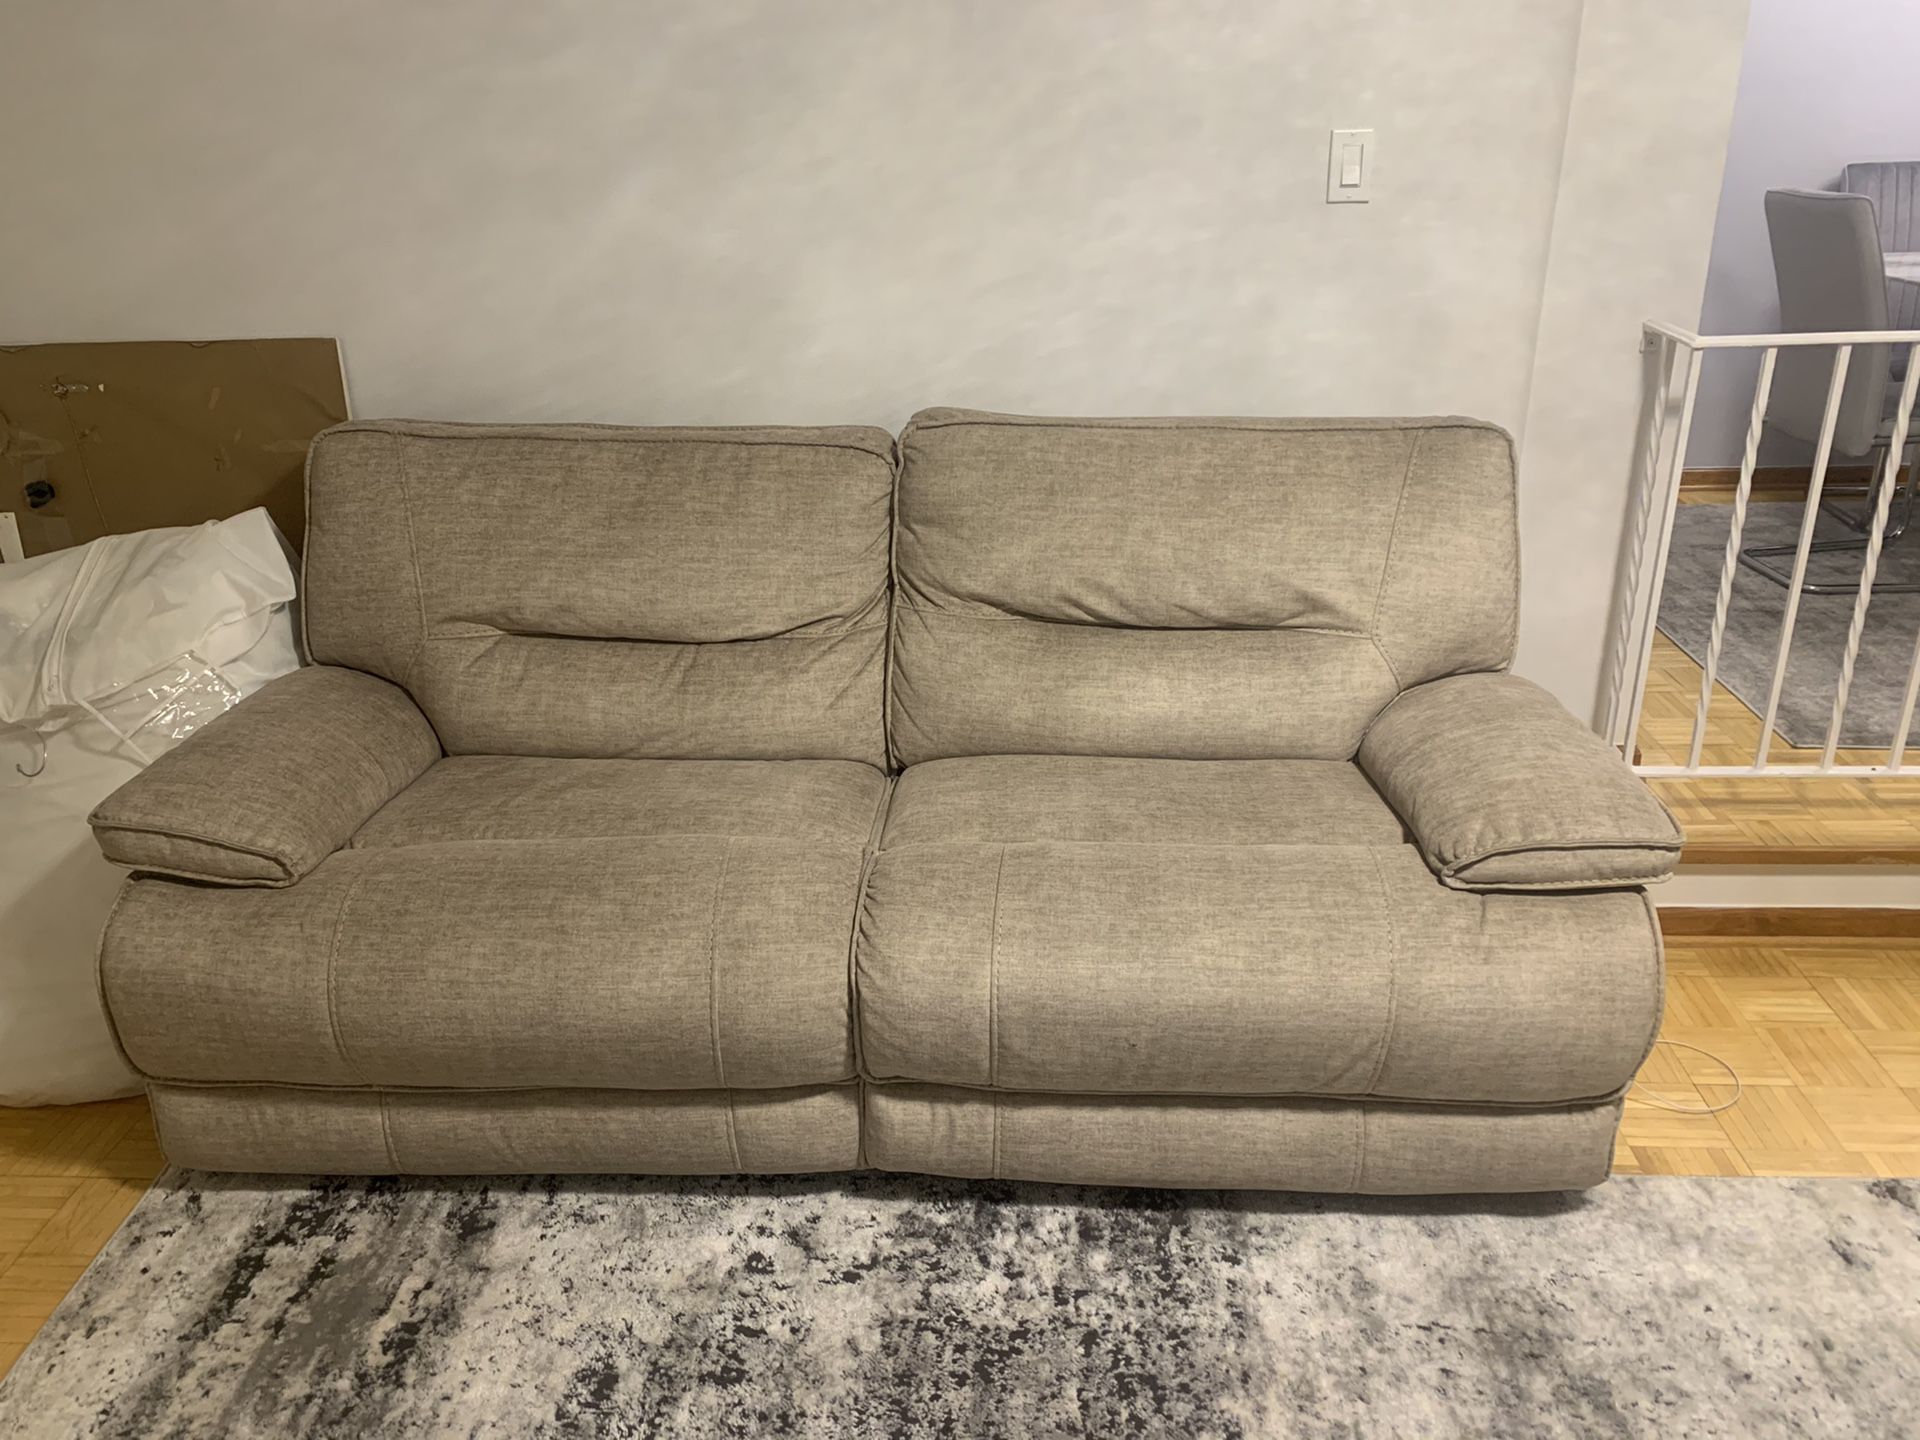 Recliner love seat/ couch